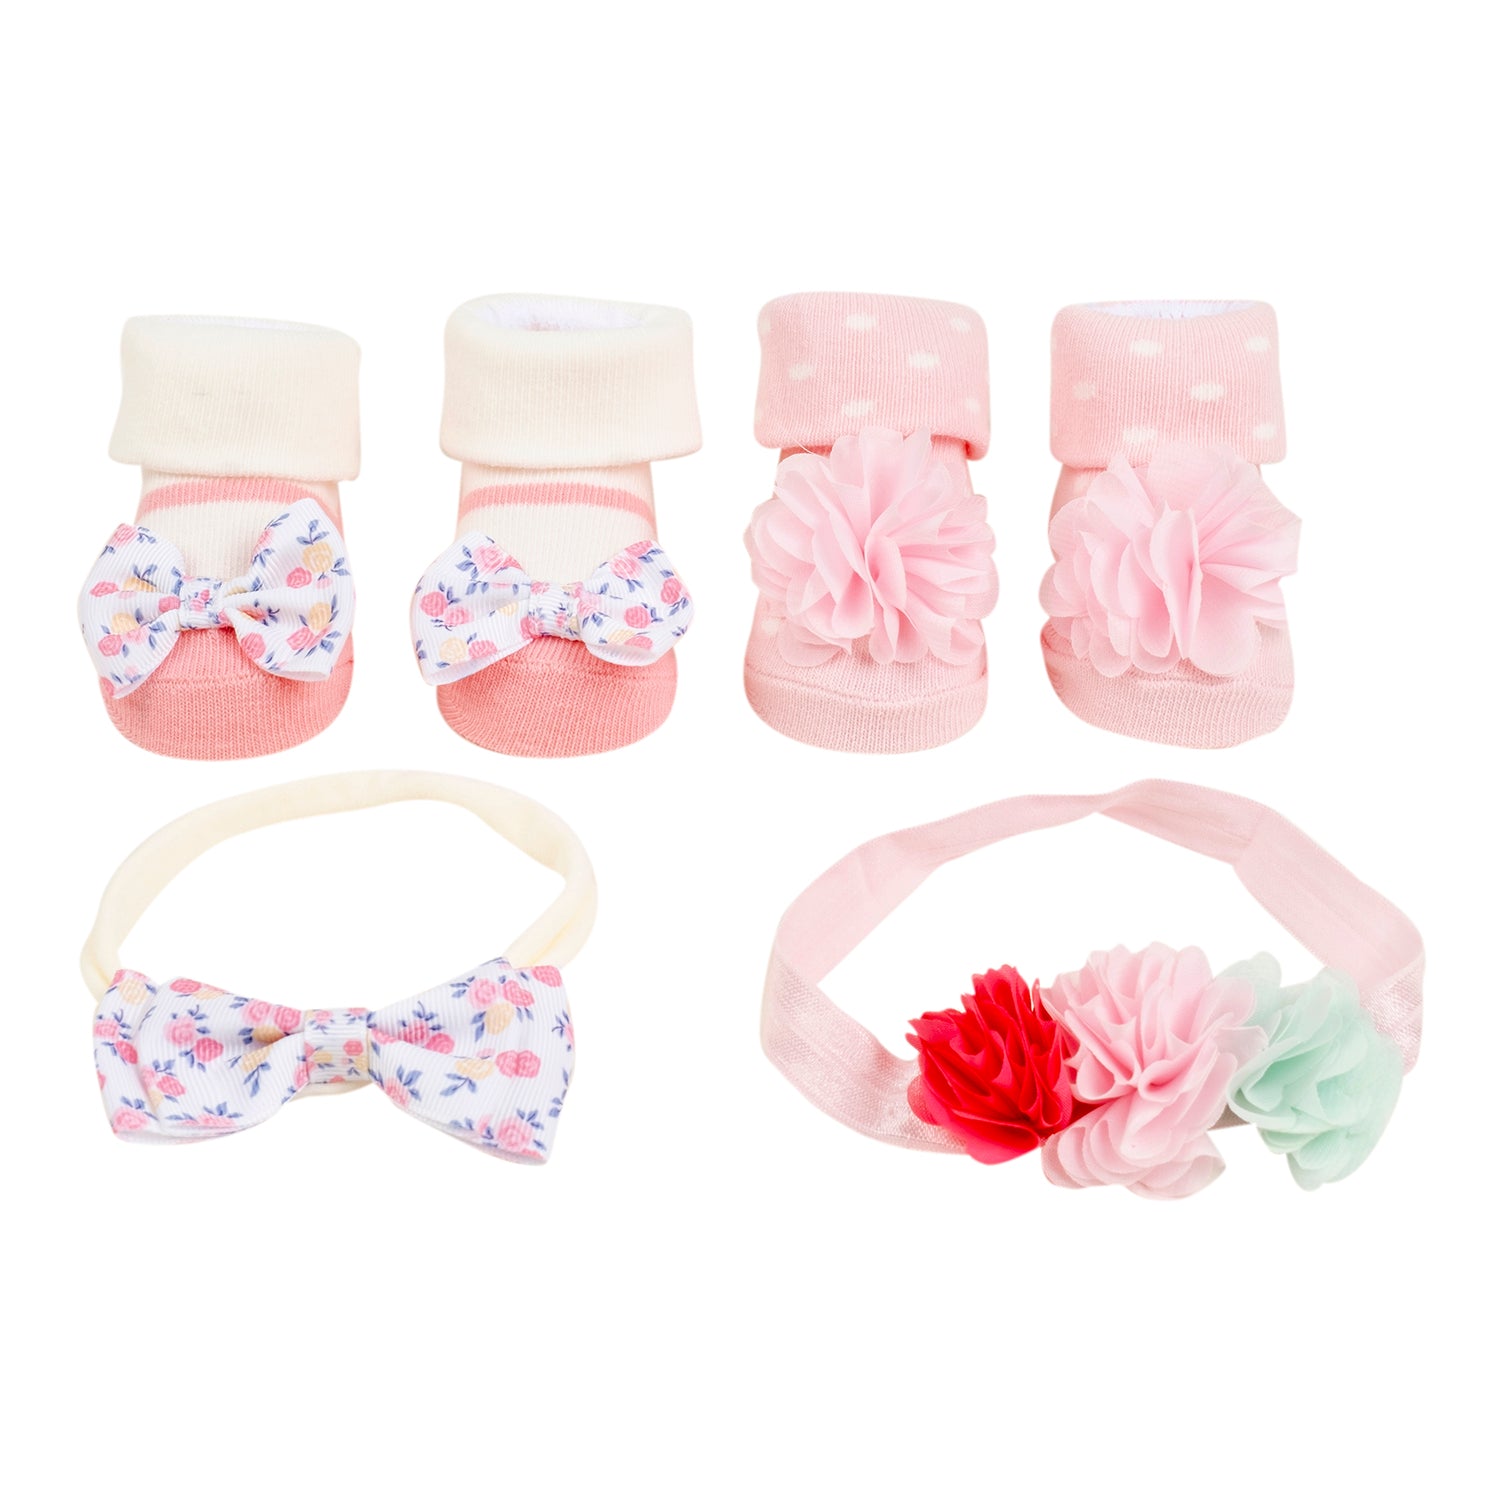 Baby Moo Pocket Full Of Posies Infant Girl 4-Piece Gift Hairband And Socks Set - Pink